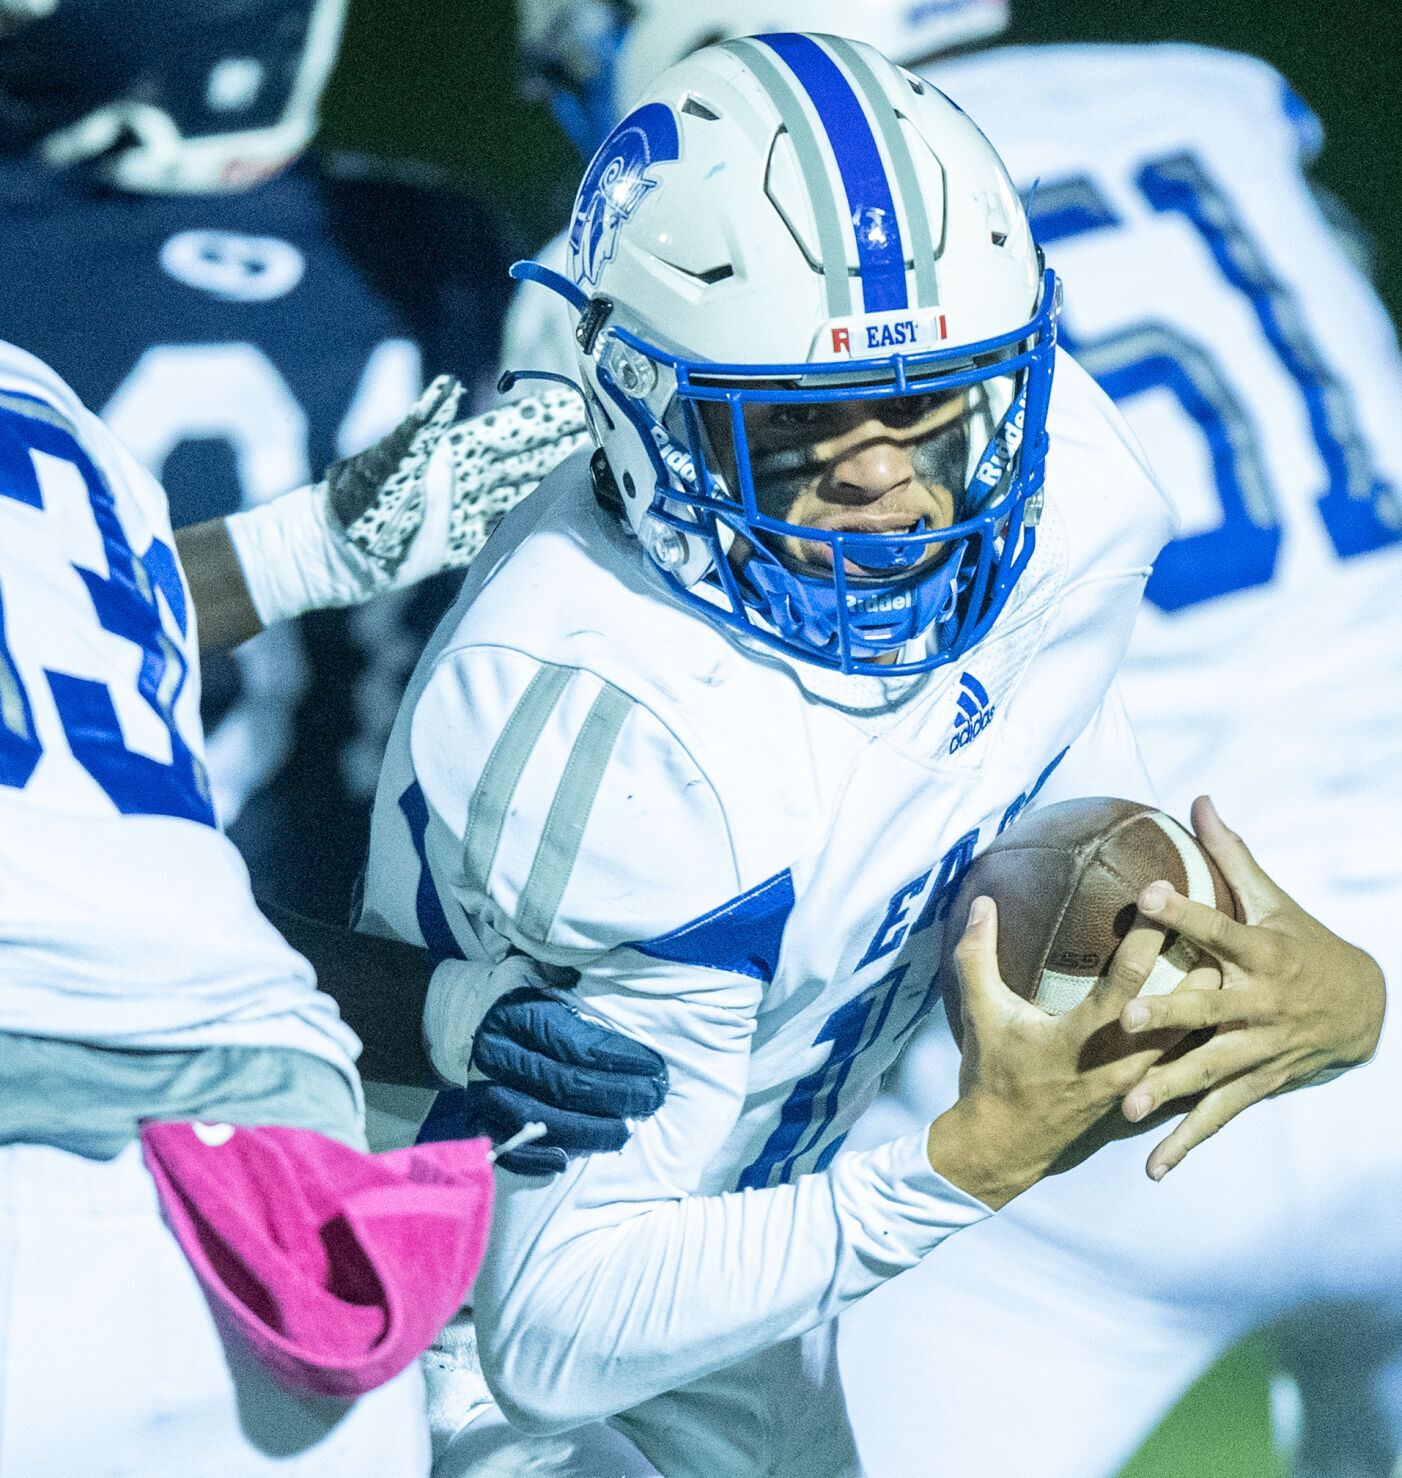 Lincoln East Dominates Lincoln North Star in 38-13 Victory